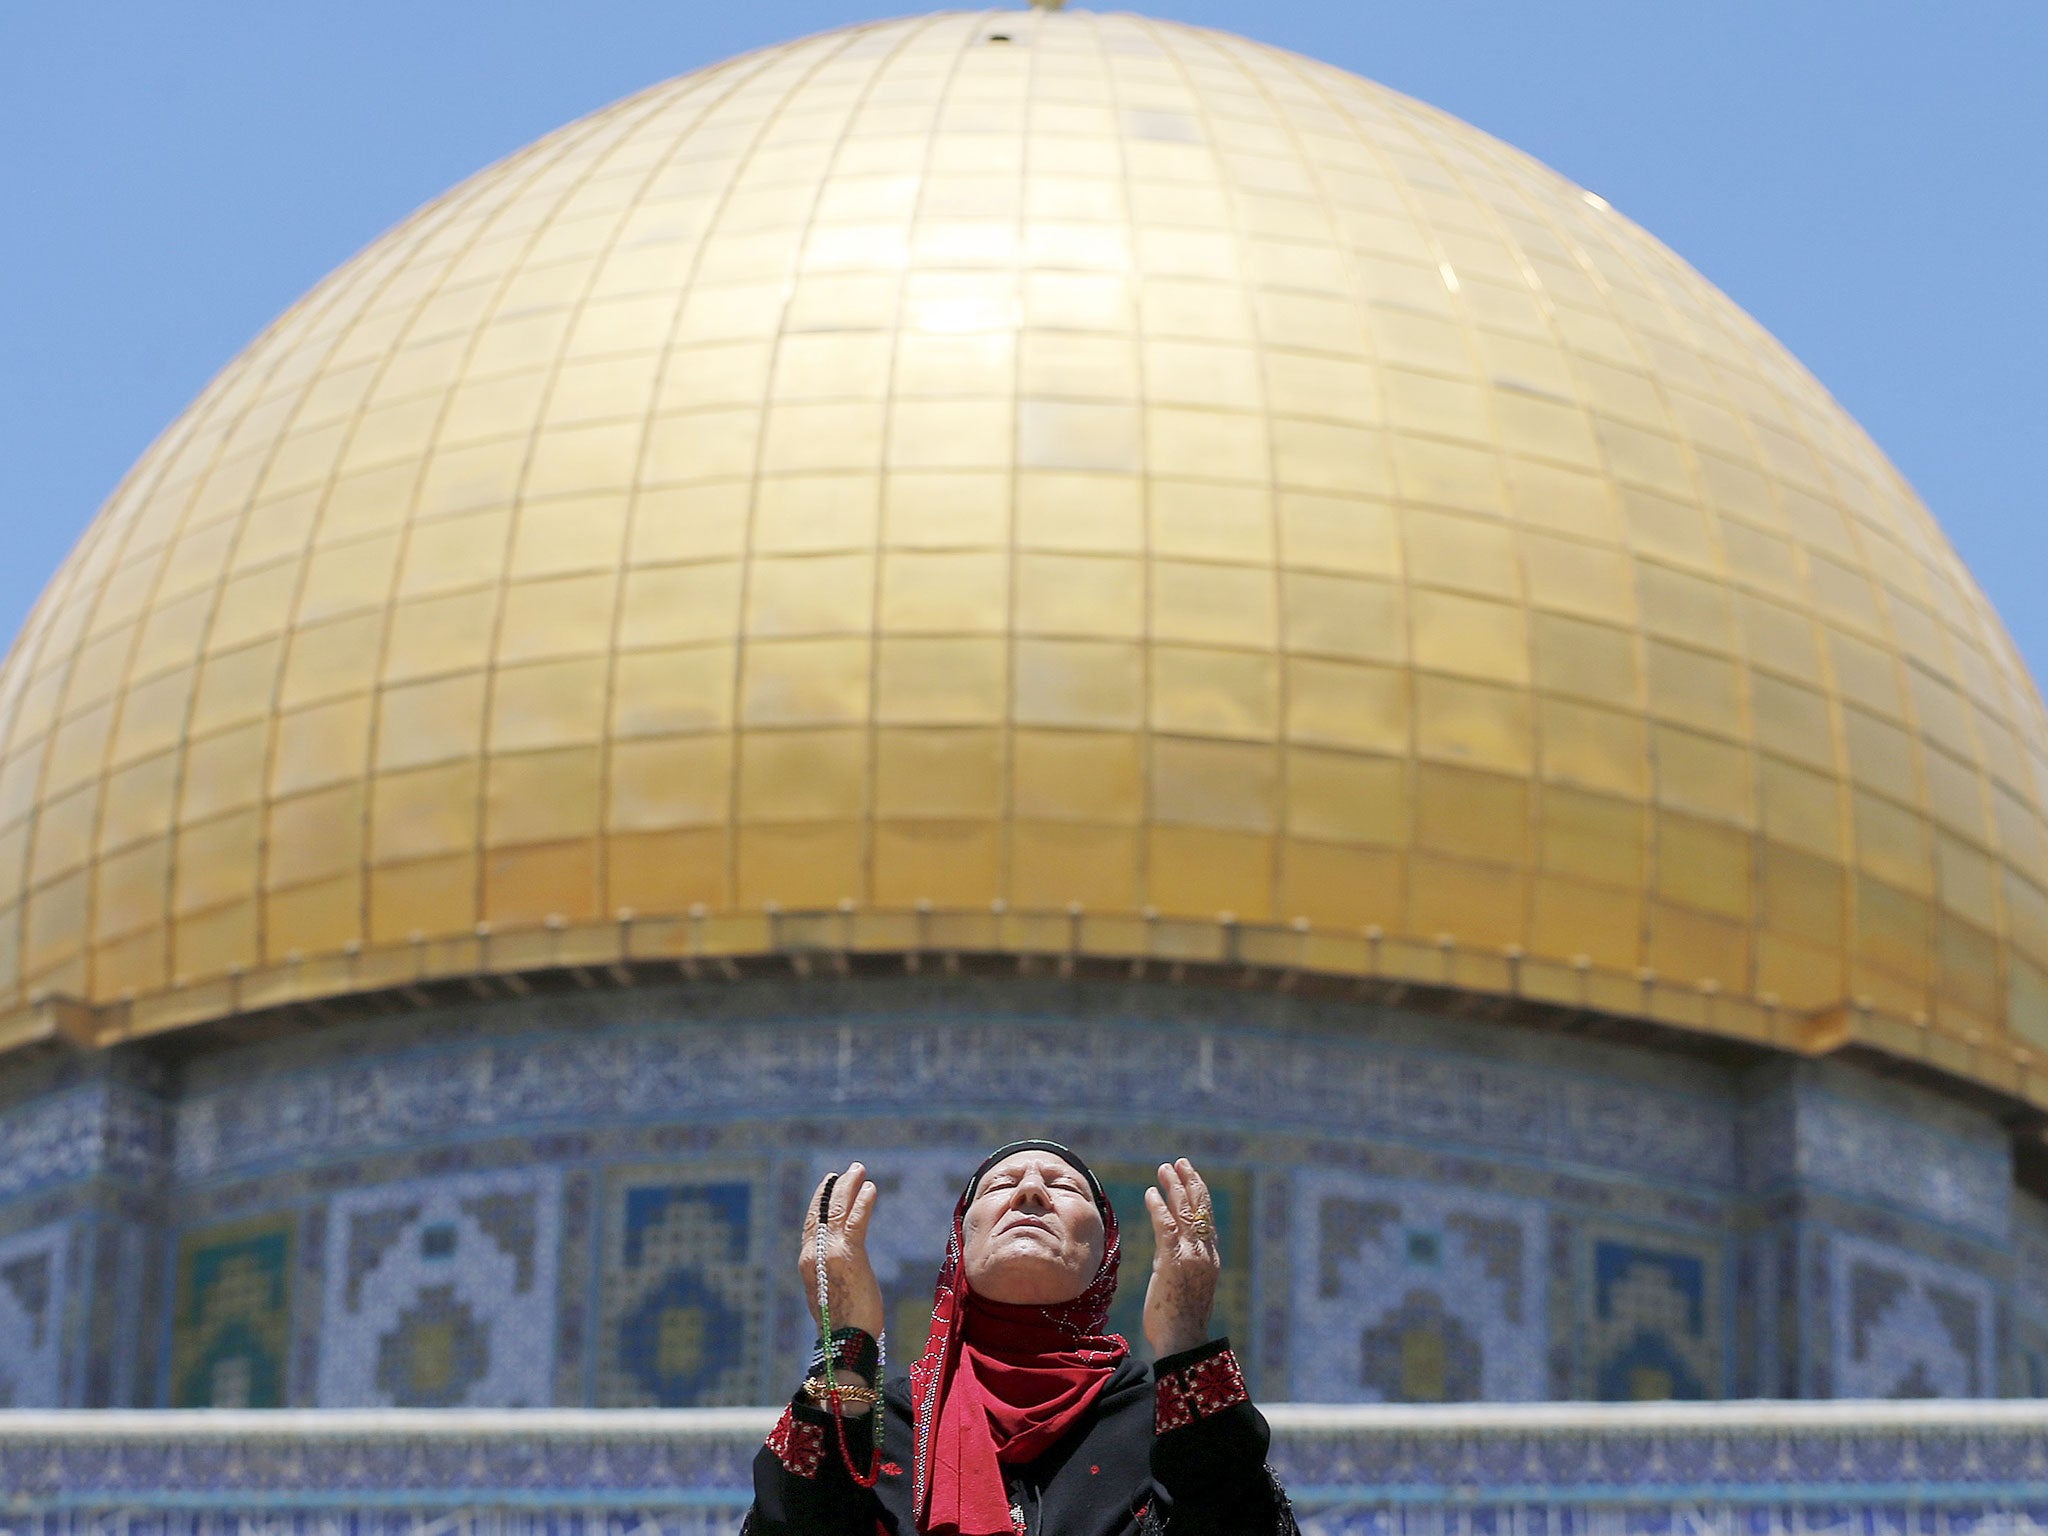 A draft Unesco resolution proposed by several Muslim states criticises restrictions placed by the Israeli government on Muslim worshippers at the Temple Mount, as it is known in Judaism, or Haram al-Sharif, as it is called in Islam